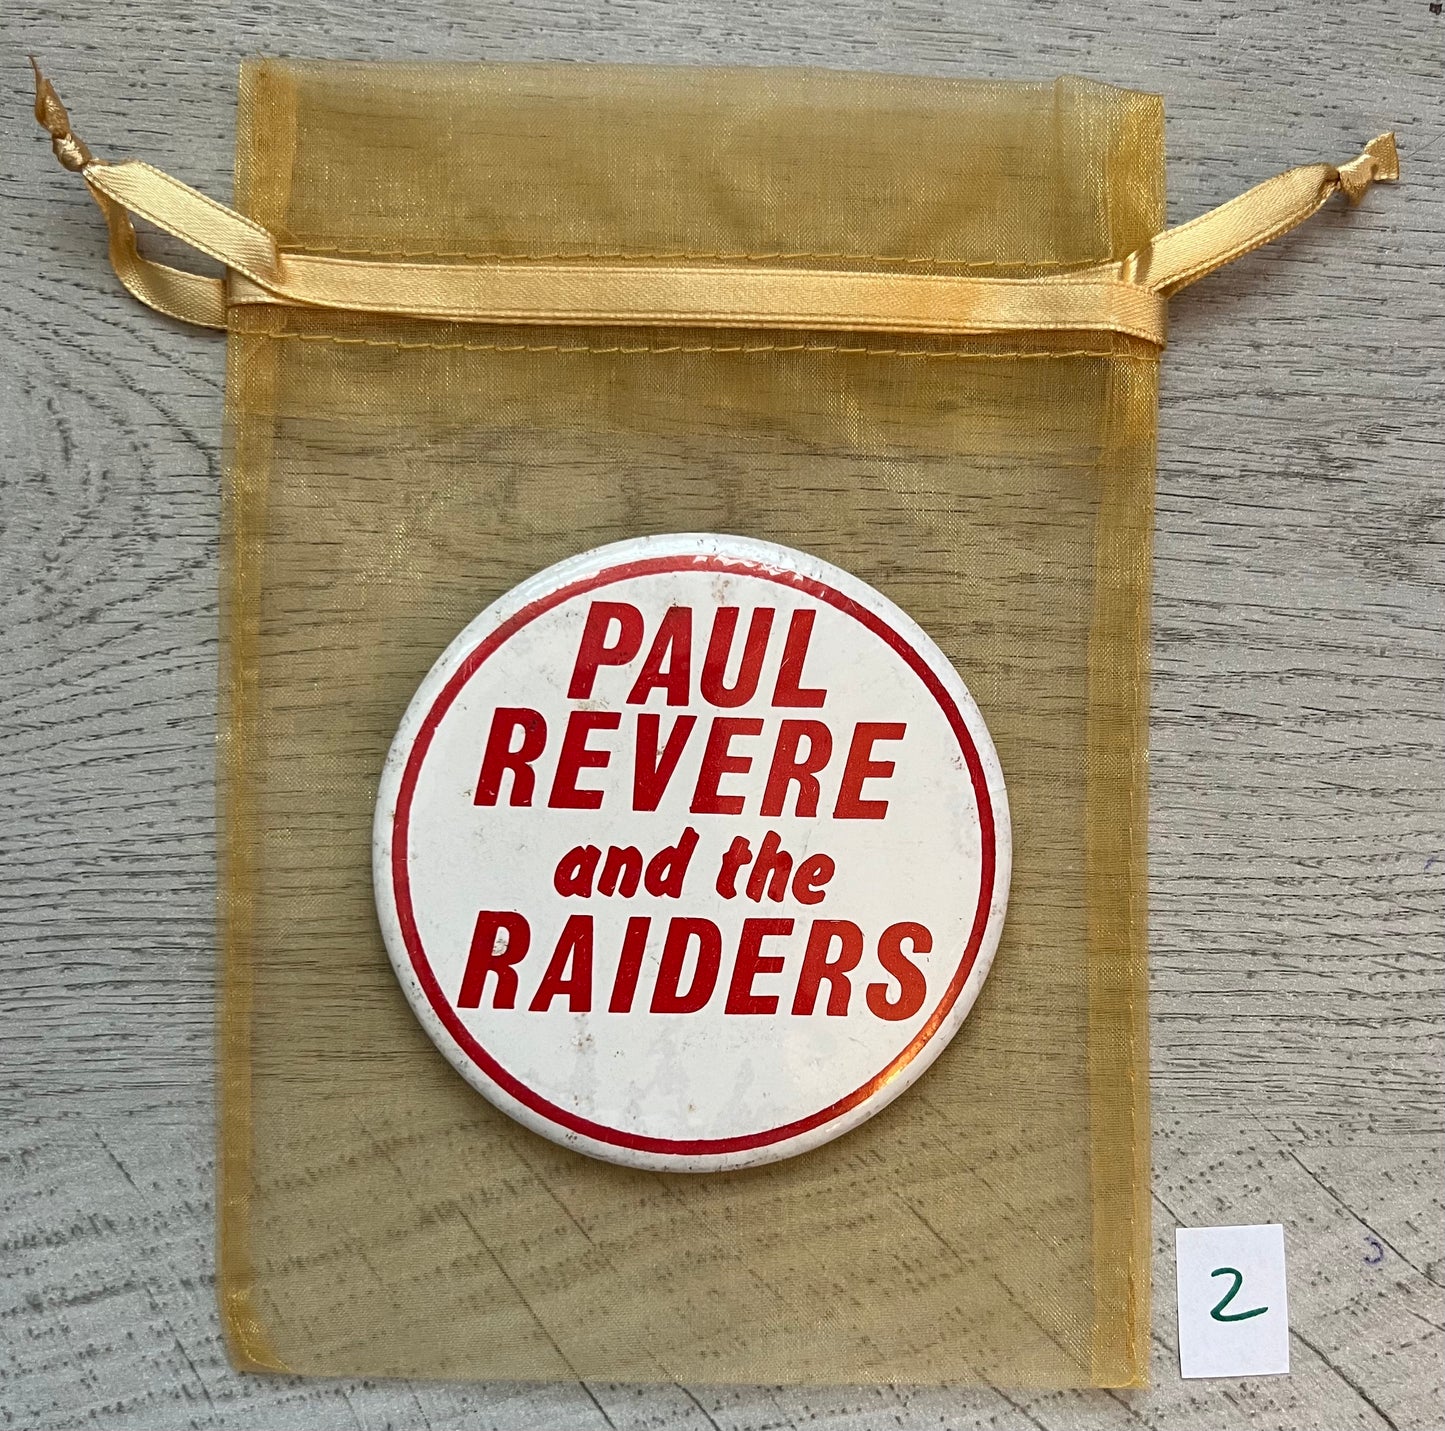 Vintage Paul Revere & the Raiders Button 2 - w/Card Personally Autographed to YOU by Mark